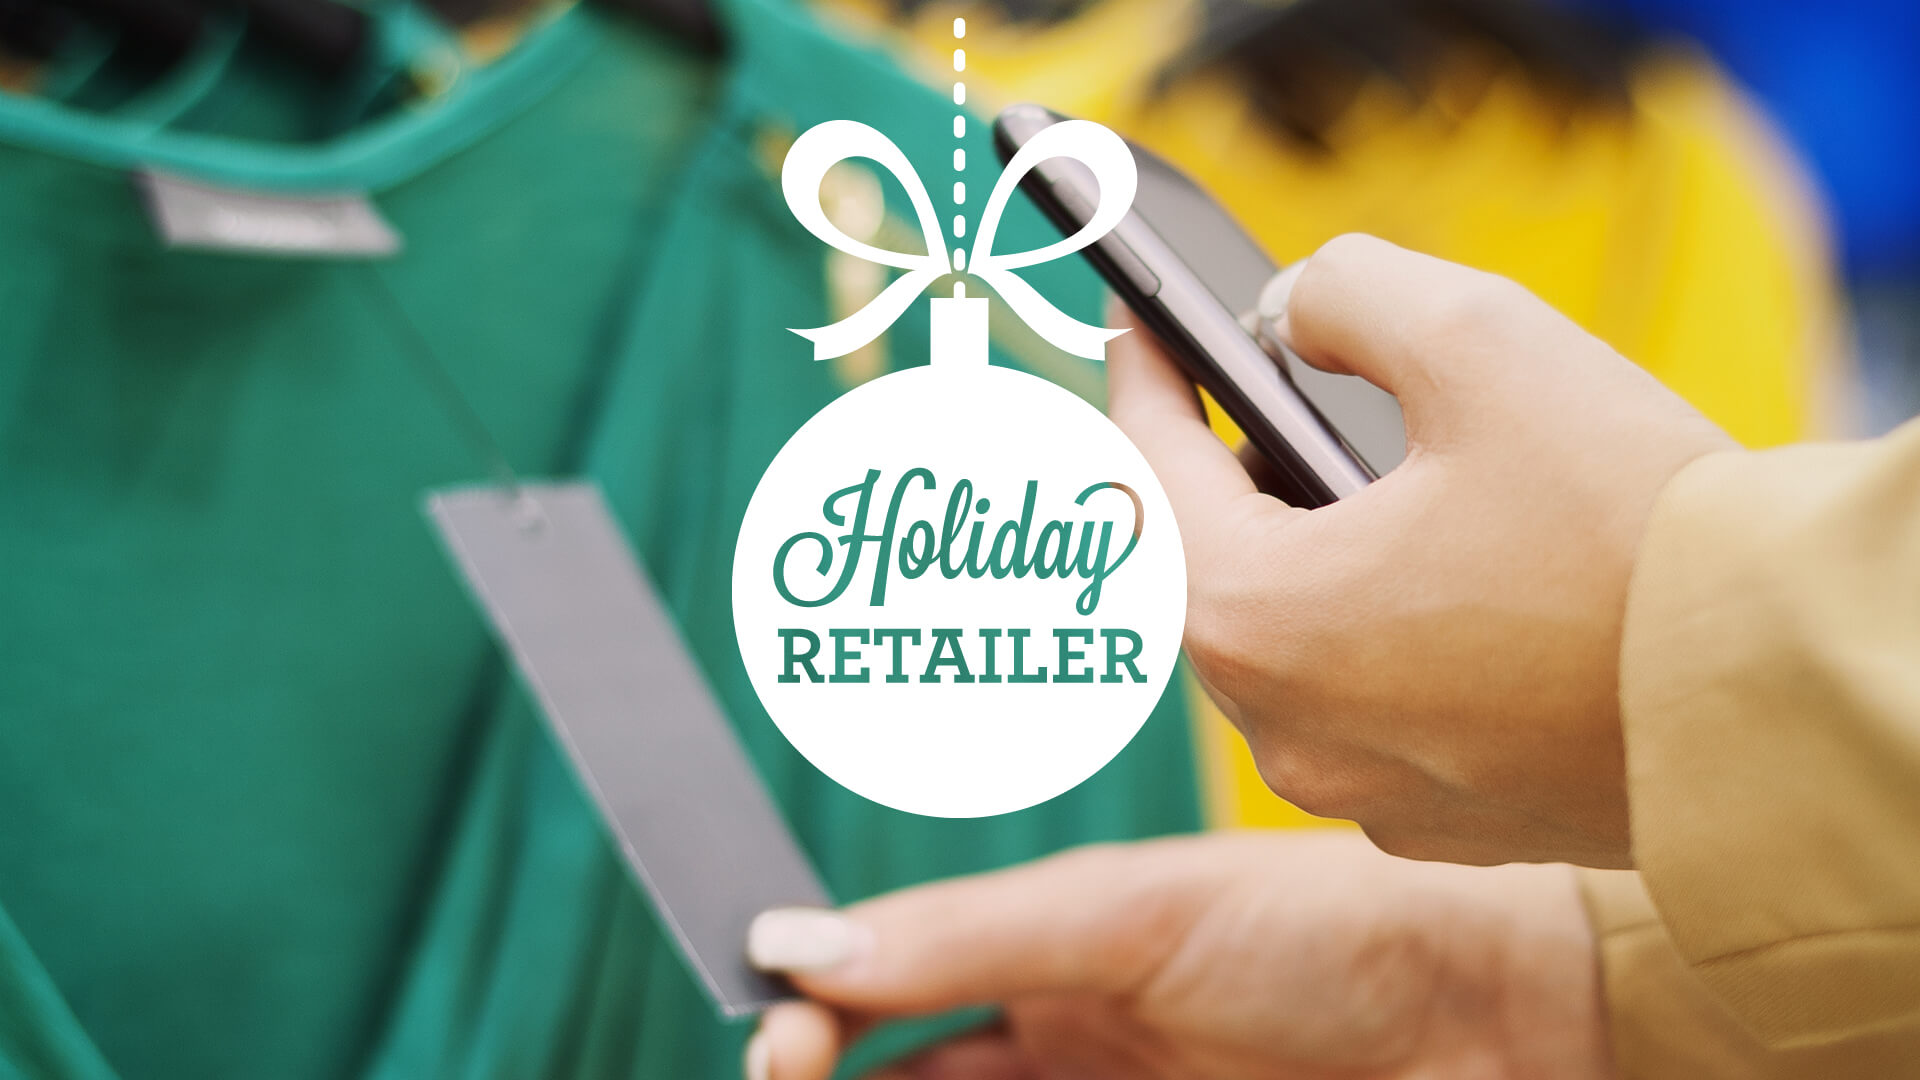 holiday-retailer2016-mobile2-ss-1920